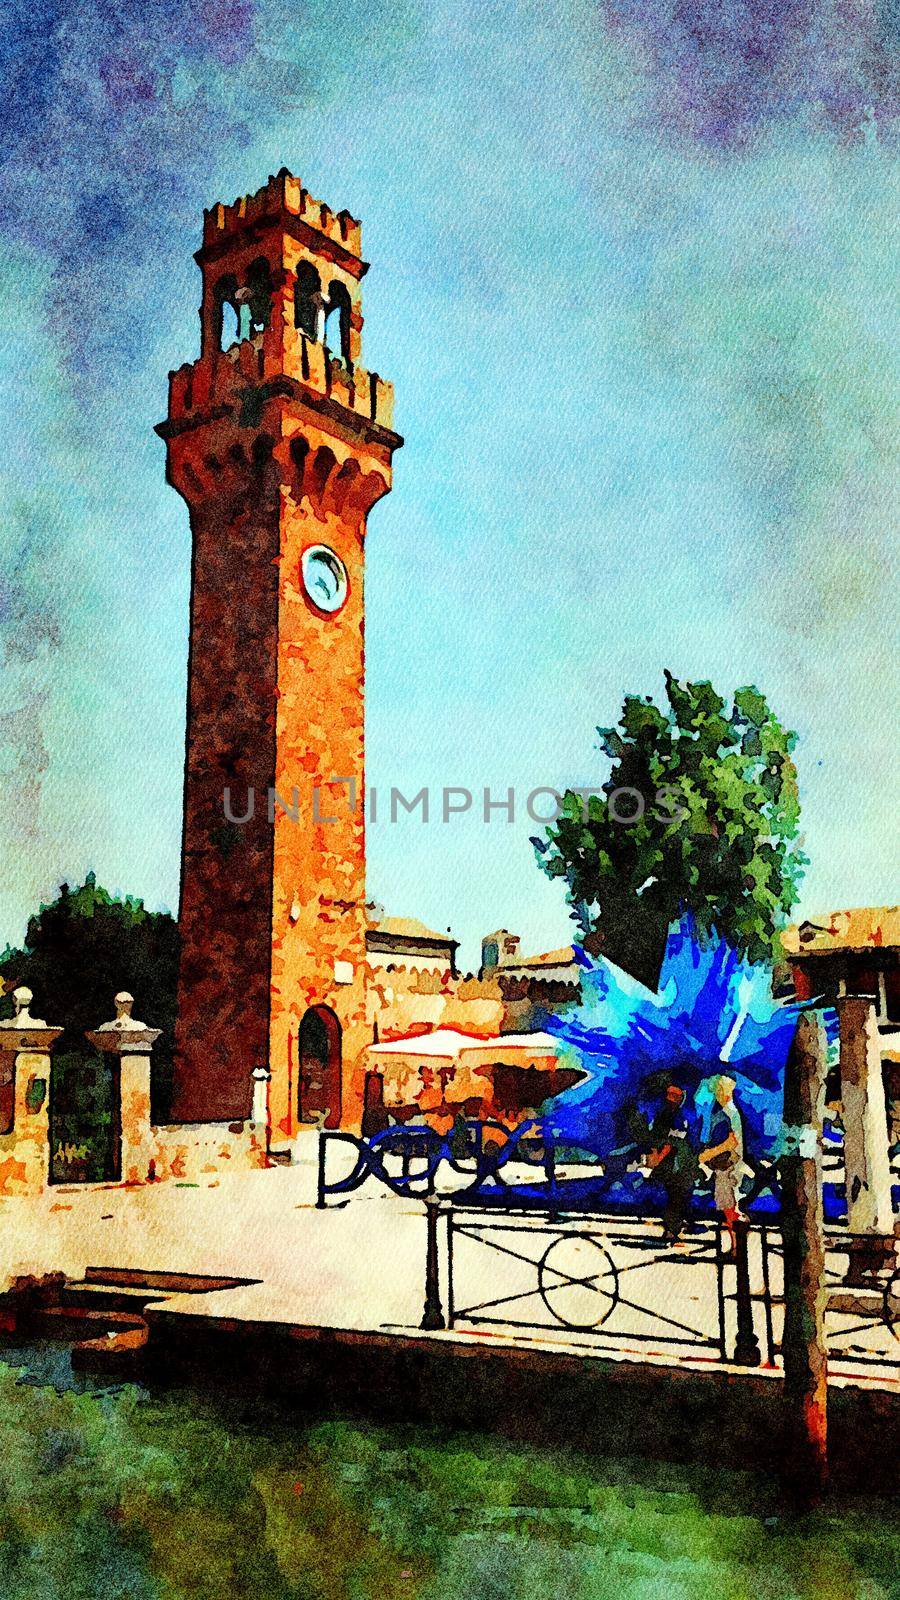 Watercolor representing one of the towers and a blue sculpture in one of the squares in the historic center of Venice